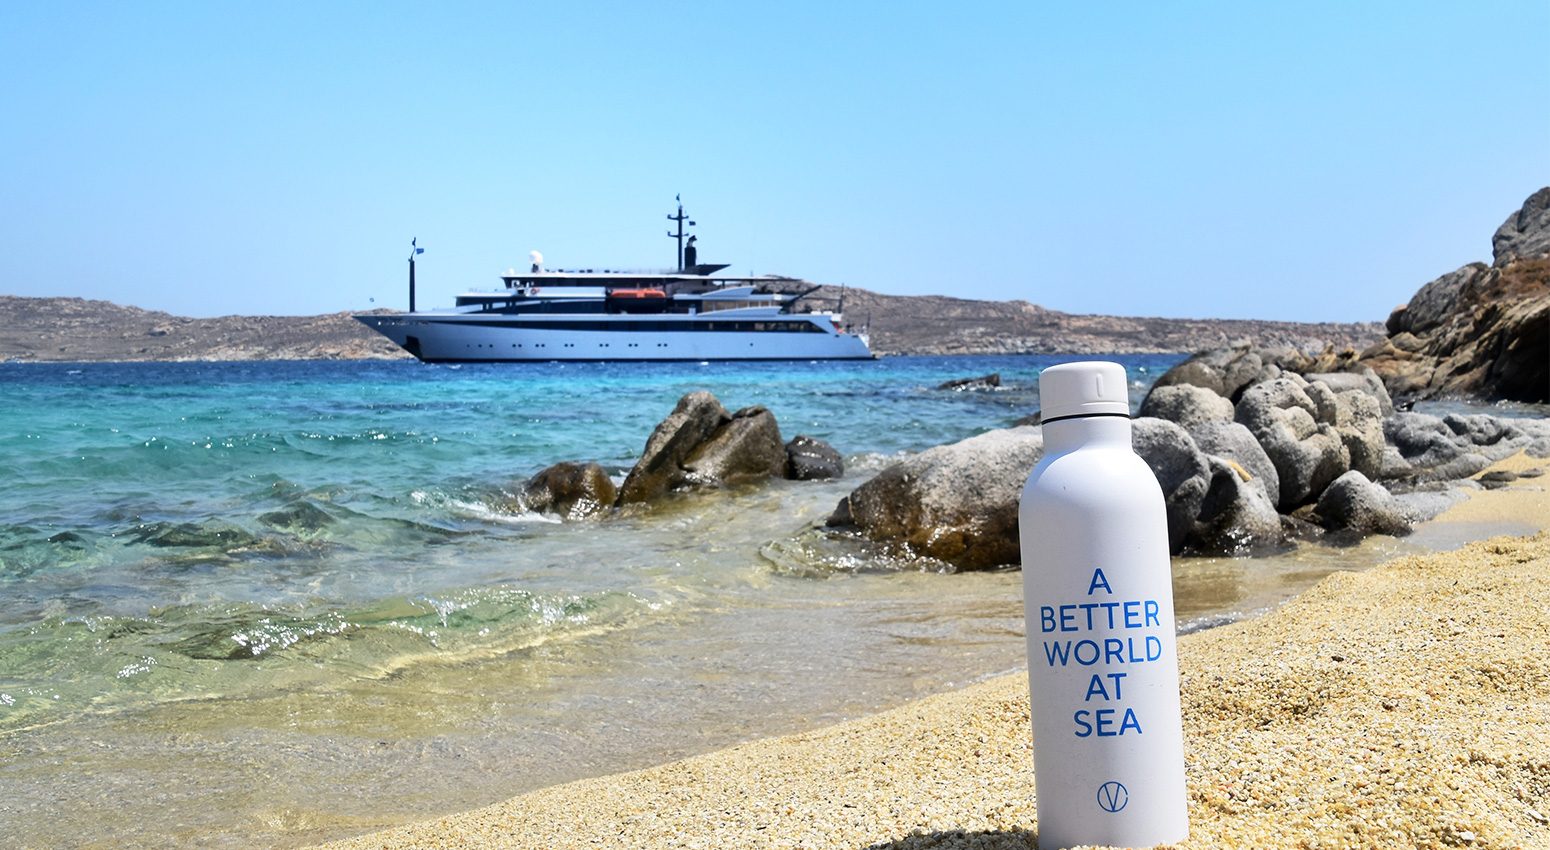 A water bottle on the beach with the text "A better world at sea" printed on it.